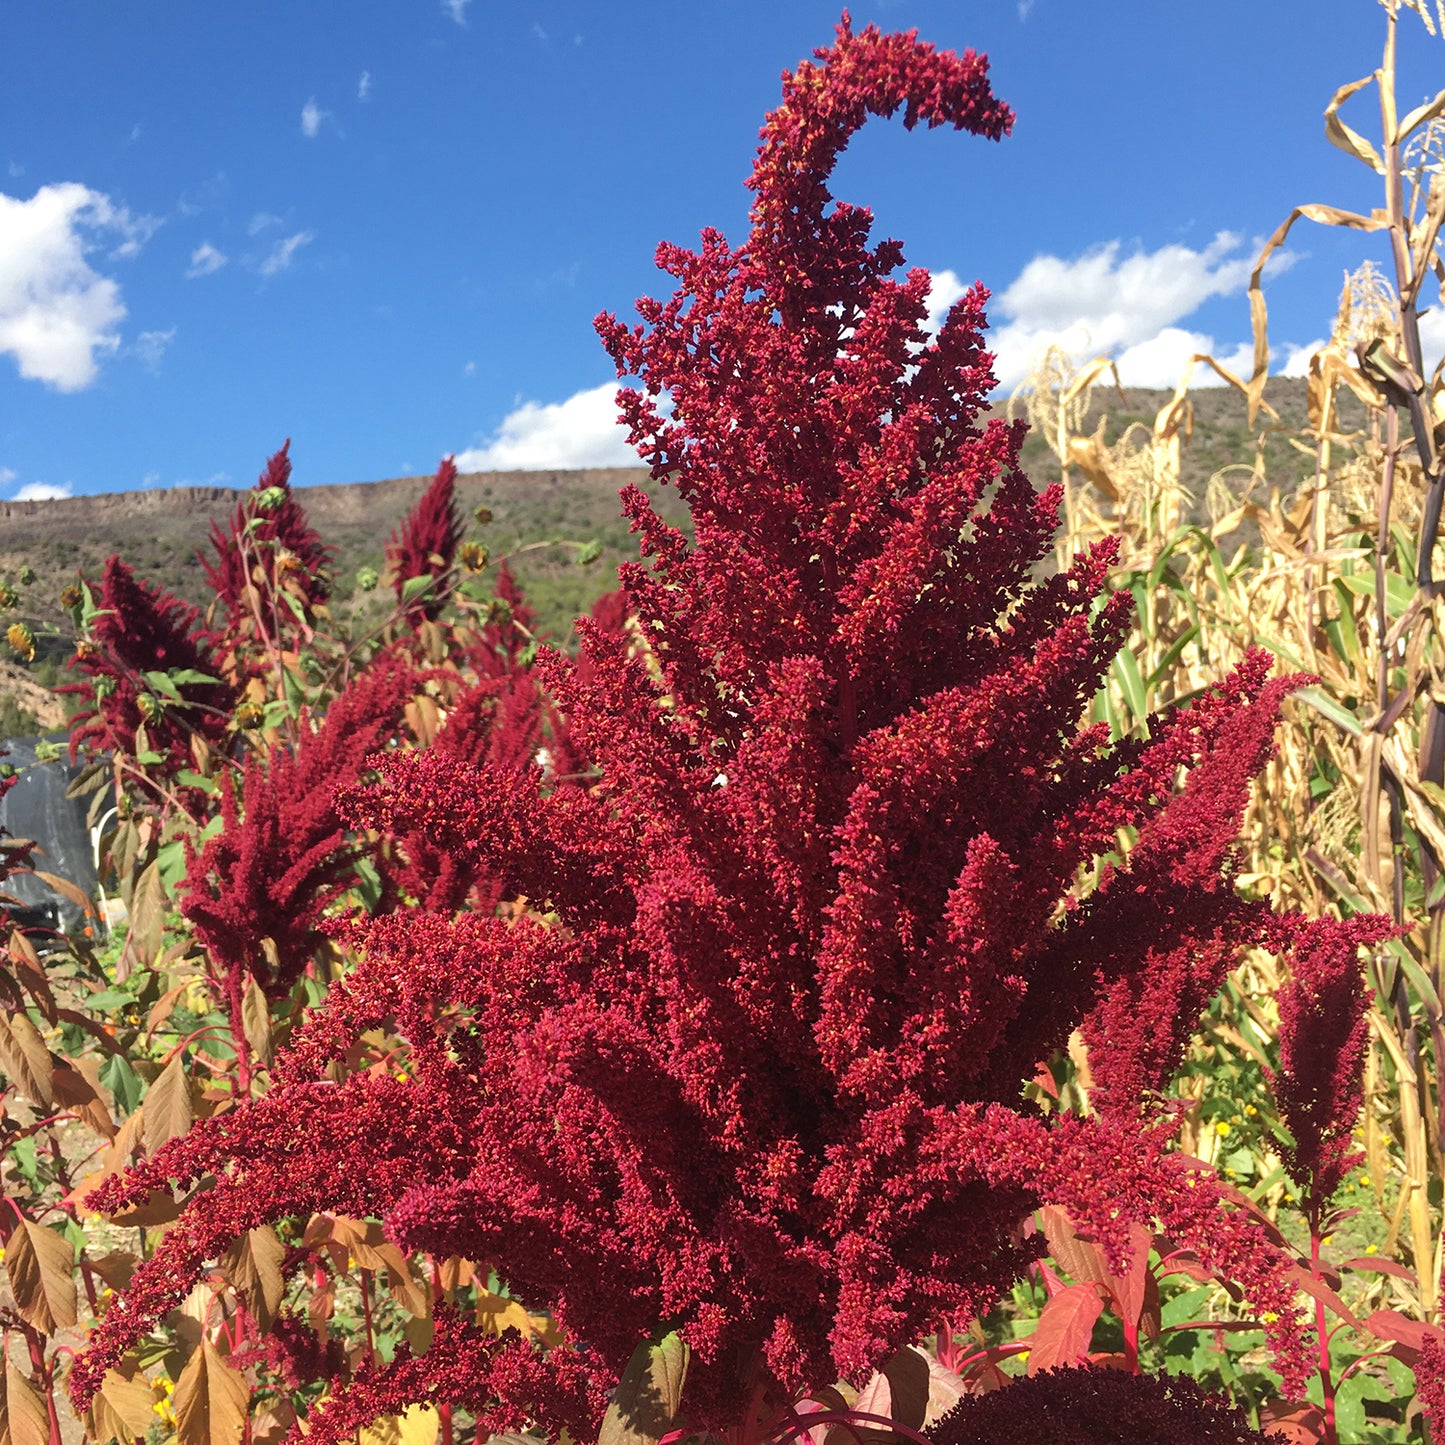 Amaranthus cruentus.  From the heart of the Chihuahuan desert in Mexico, this beautiful amaranth variety is also called Sangre de Castilla, the "Blood of Noble Spain." The black seeds are edible and the leaves are used as greens. The plants can grow 5 to 8 feet tall in good soil. From our Seed Bank Collection.